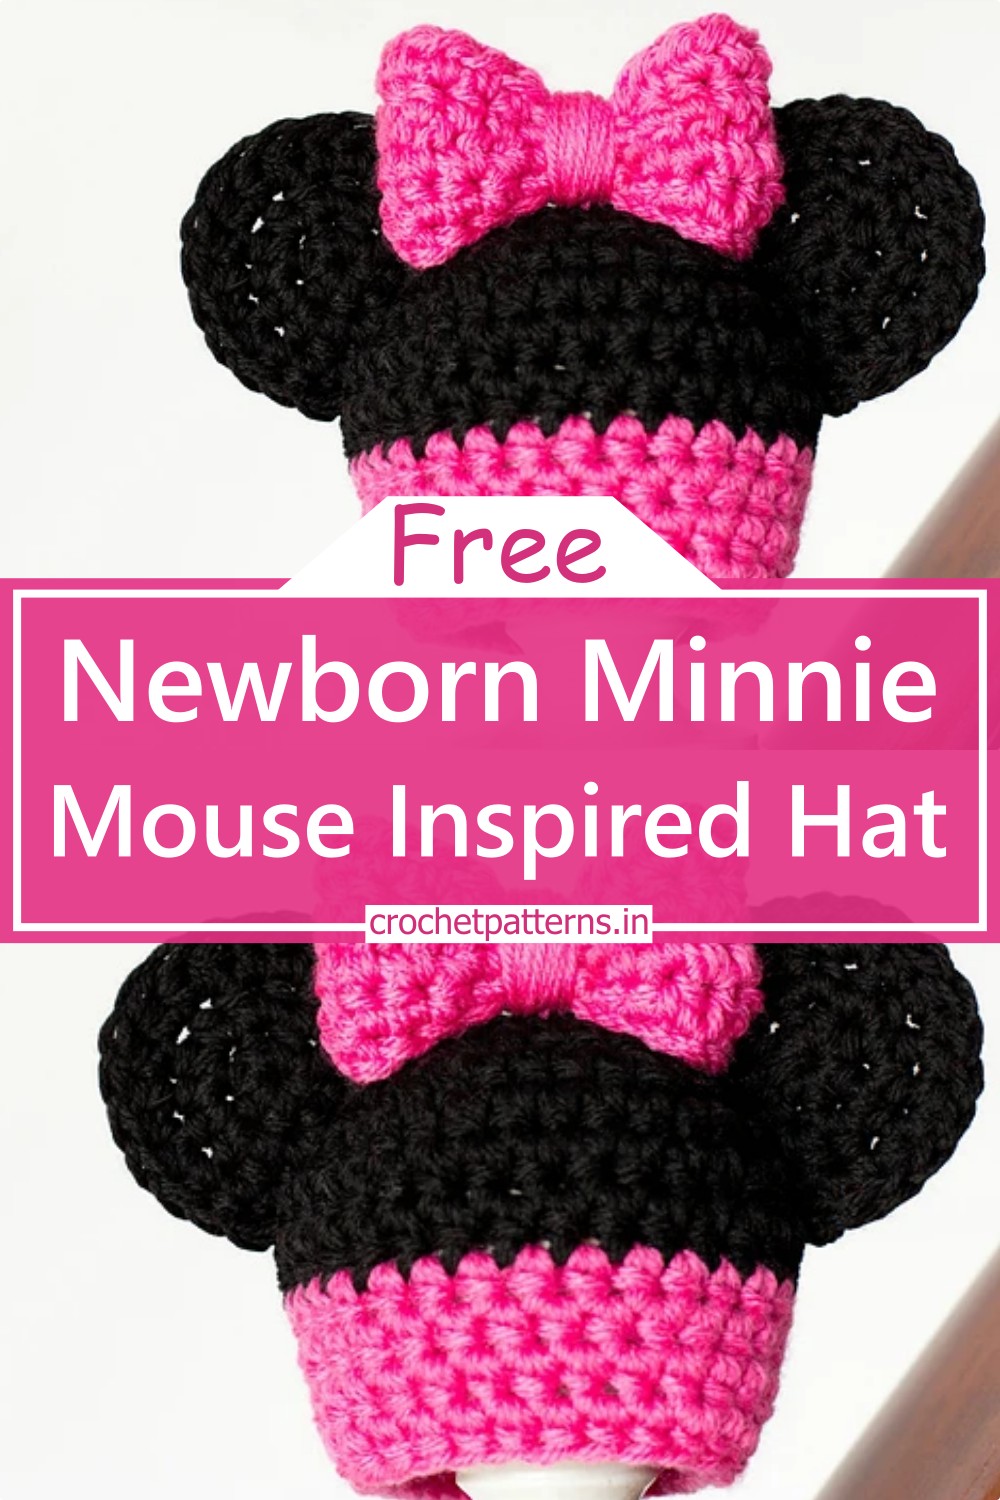 Newborn Mouse Inspired Hat